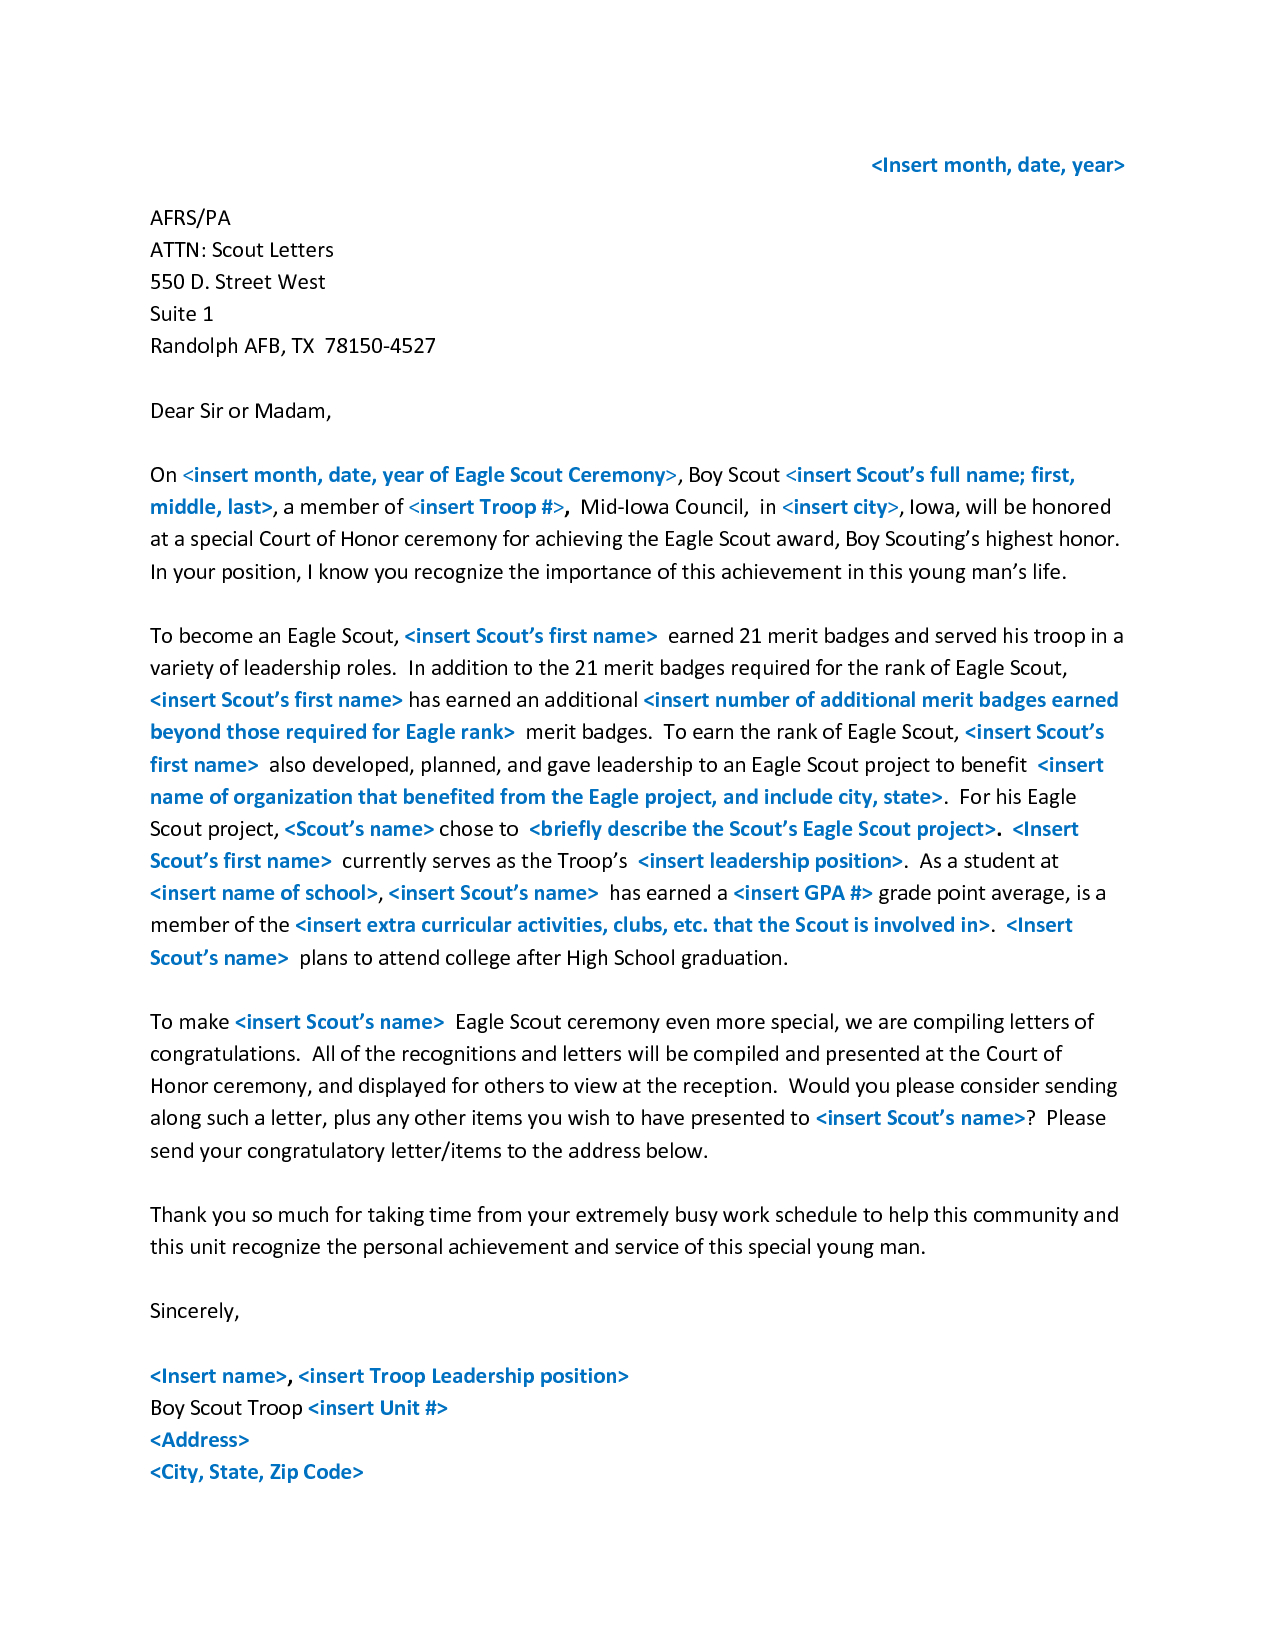 Eagle Scout Letter Of Recommendation Yahoo Image Search with regard to dimensions 1275 X 1650